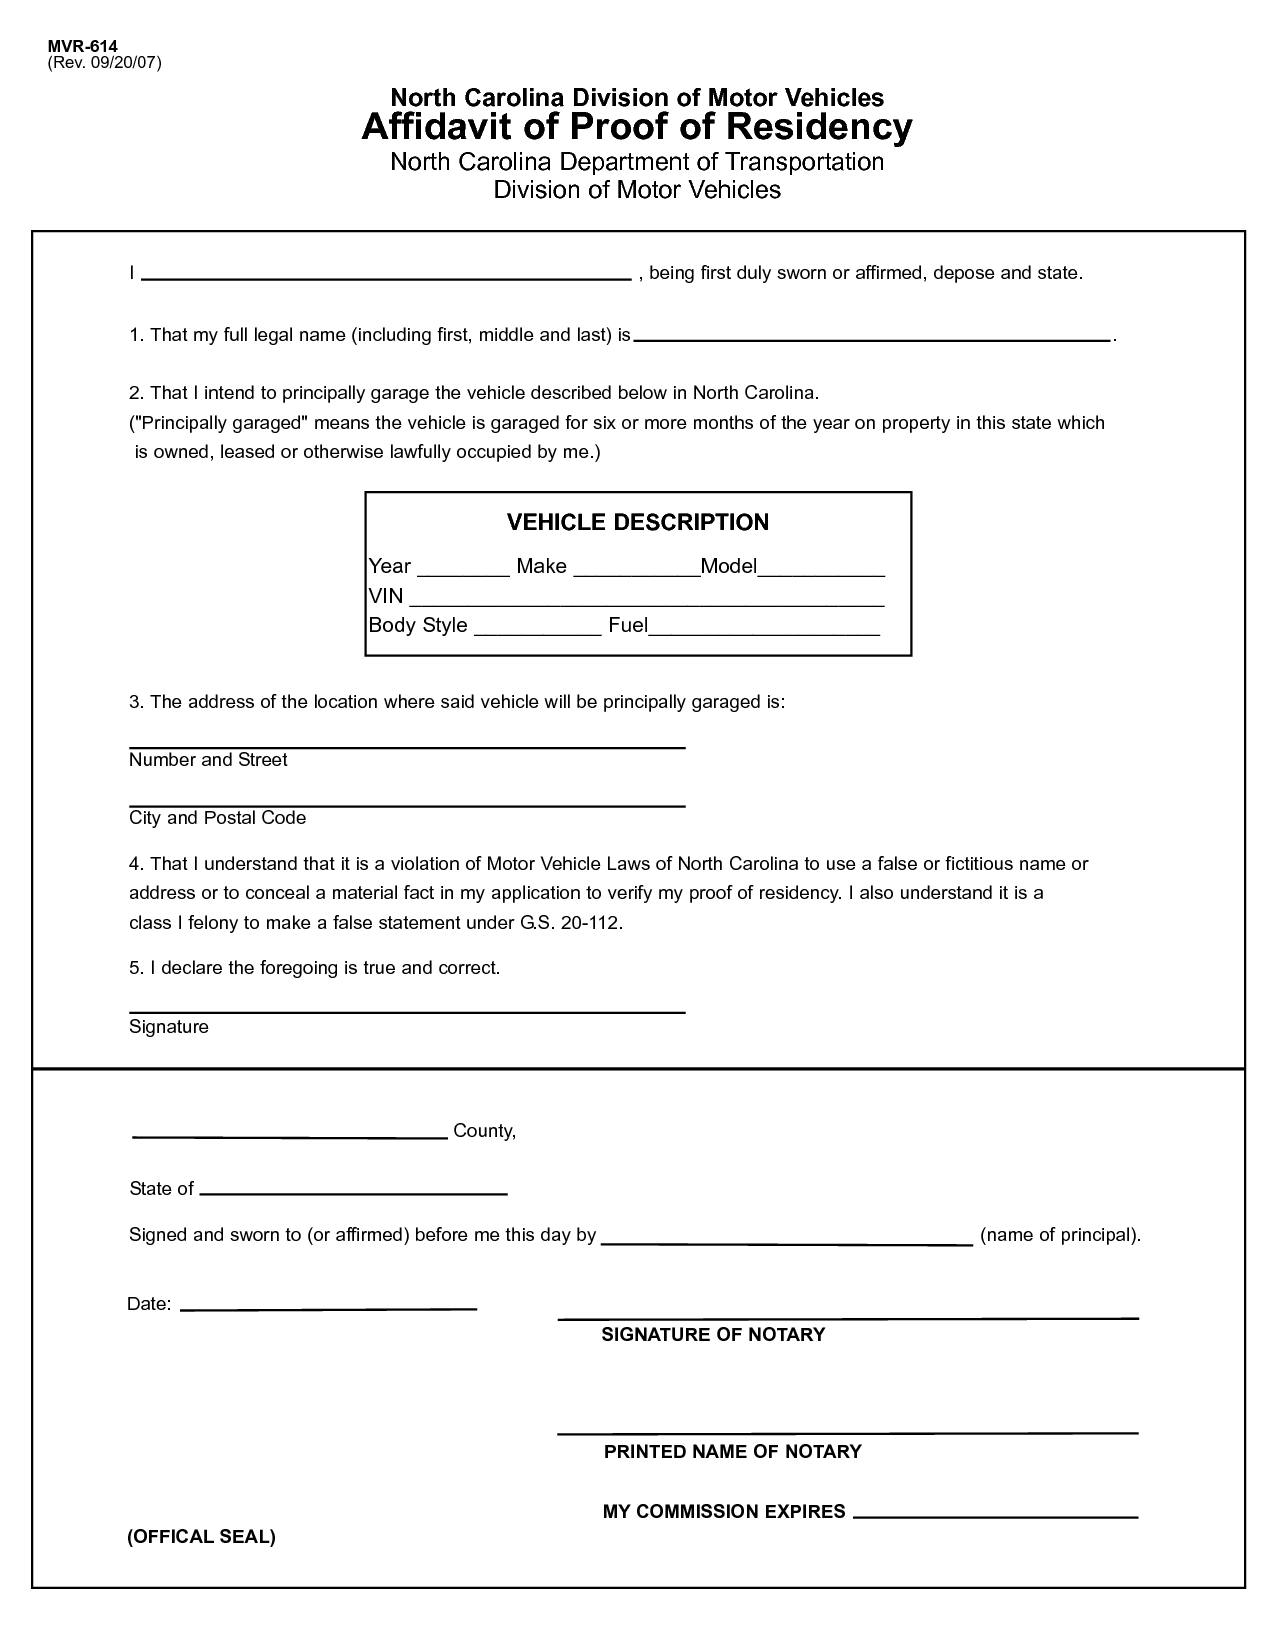 Proof Of Residency Notarized Letter from certificateof.com